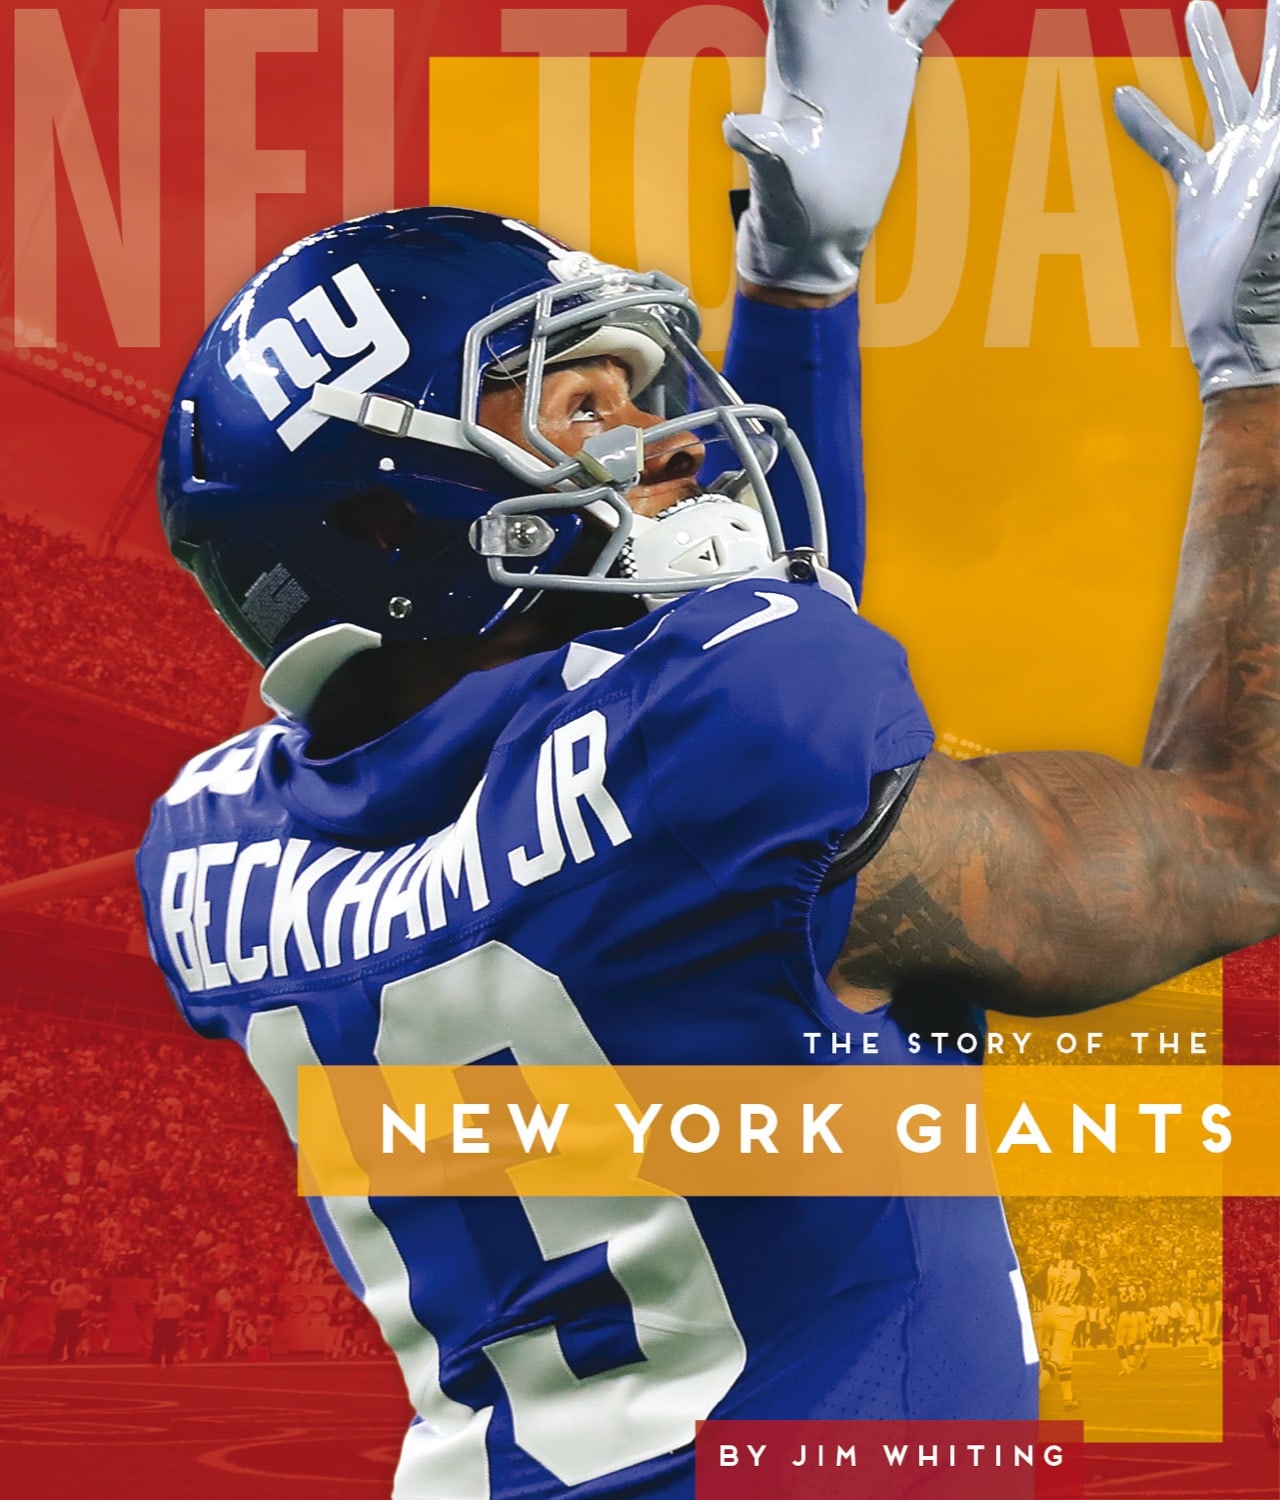 NFL Today: New York Giants – The Creative Company Shop